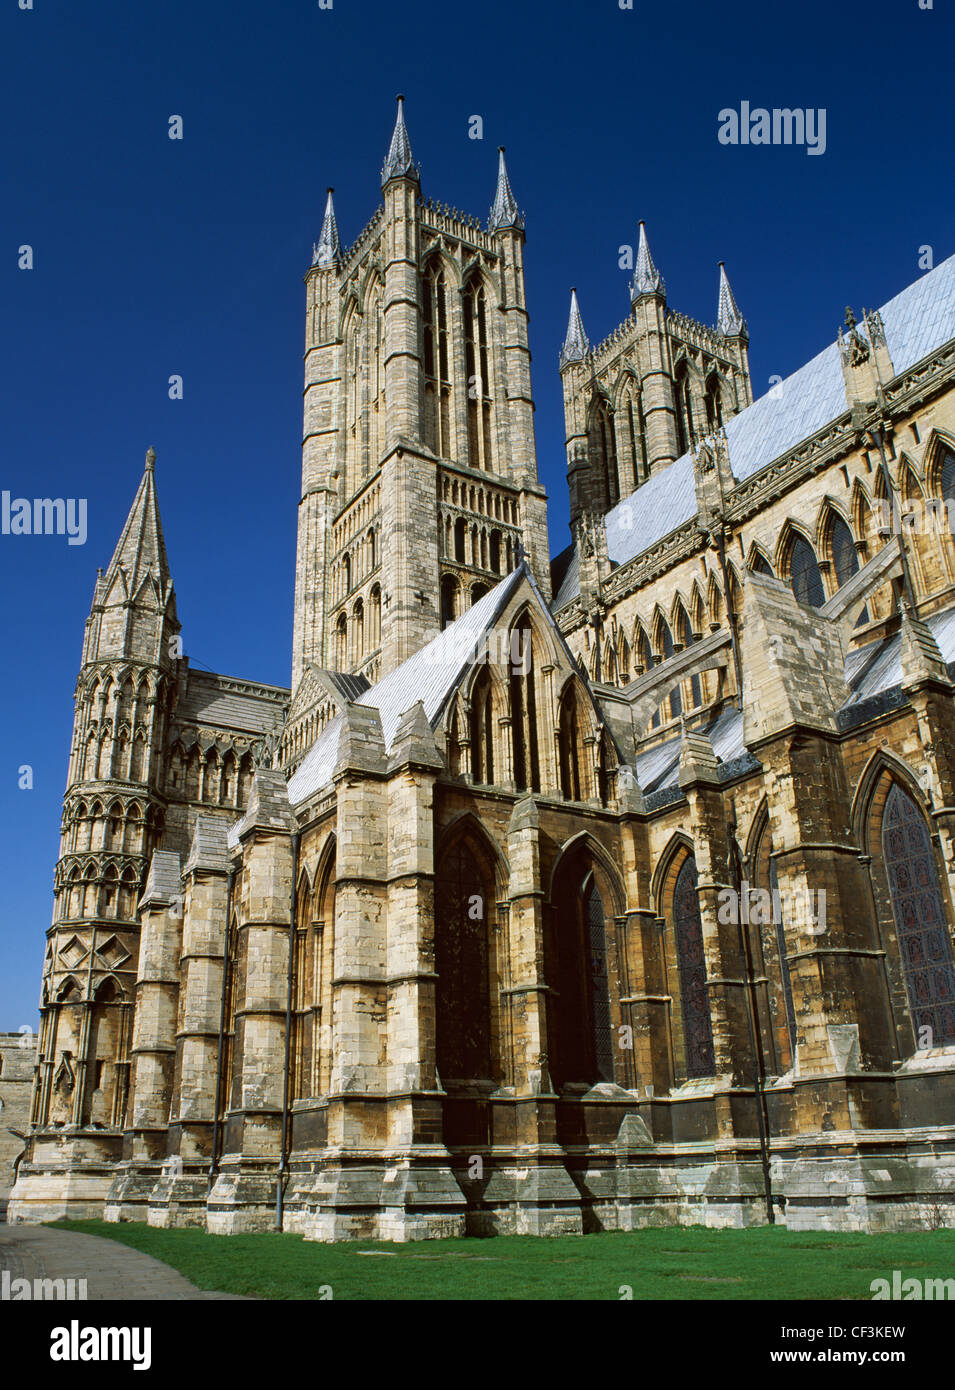 The western end of Lincoln Cathedral showing part of the exterior of the Early English Gothic nave and the Perpendicular towers Stock Photo